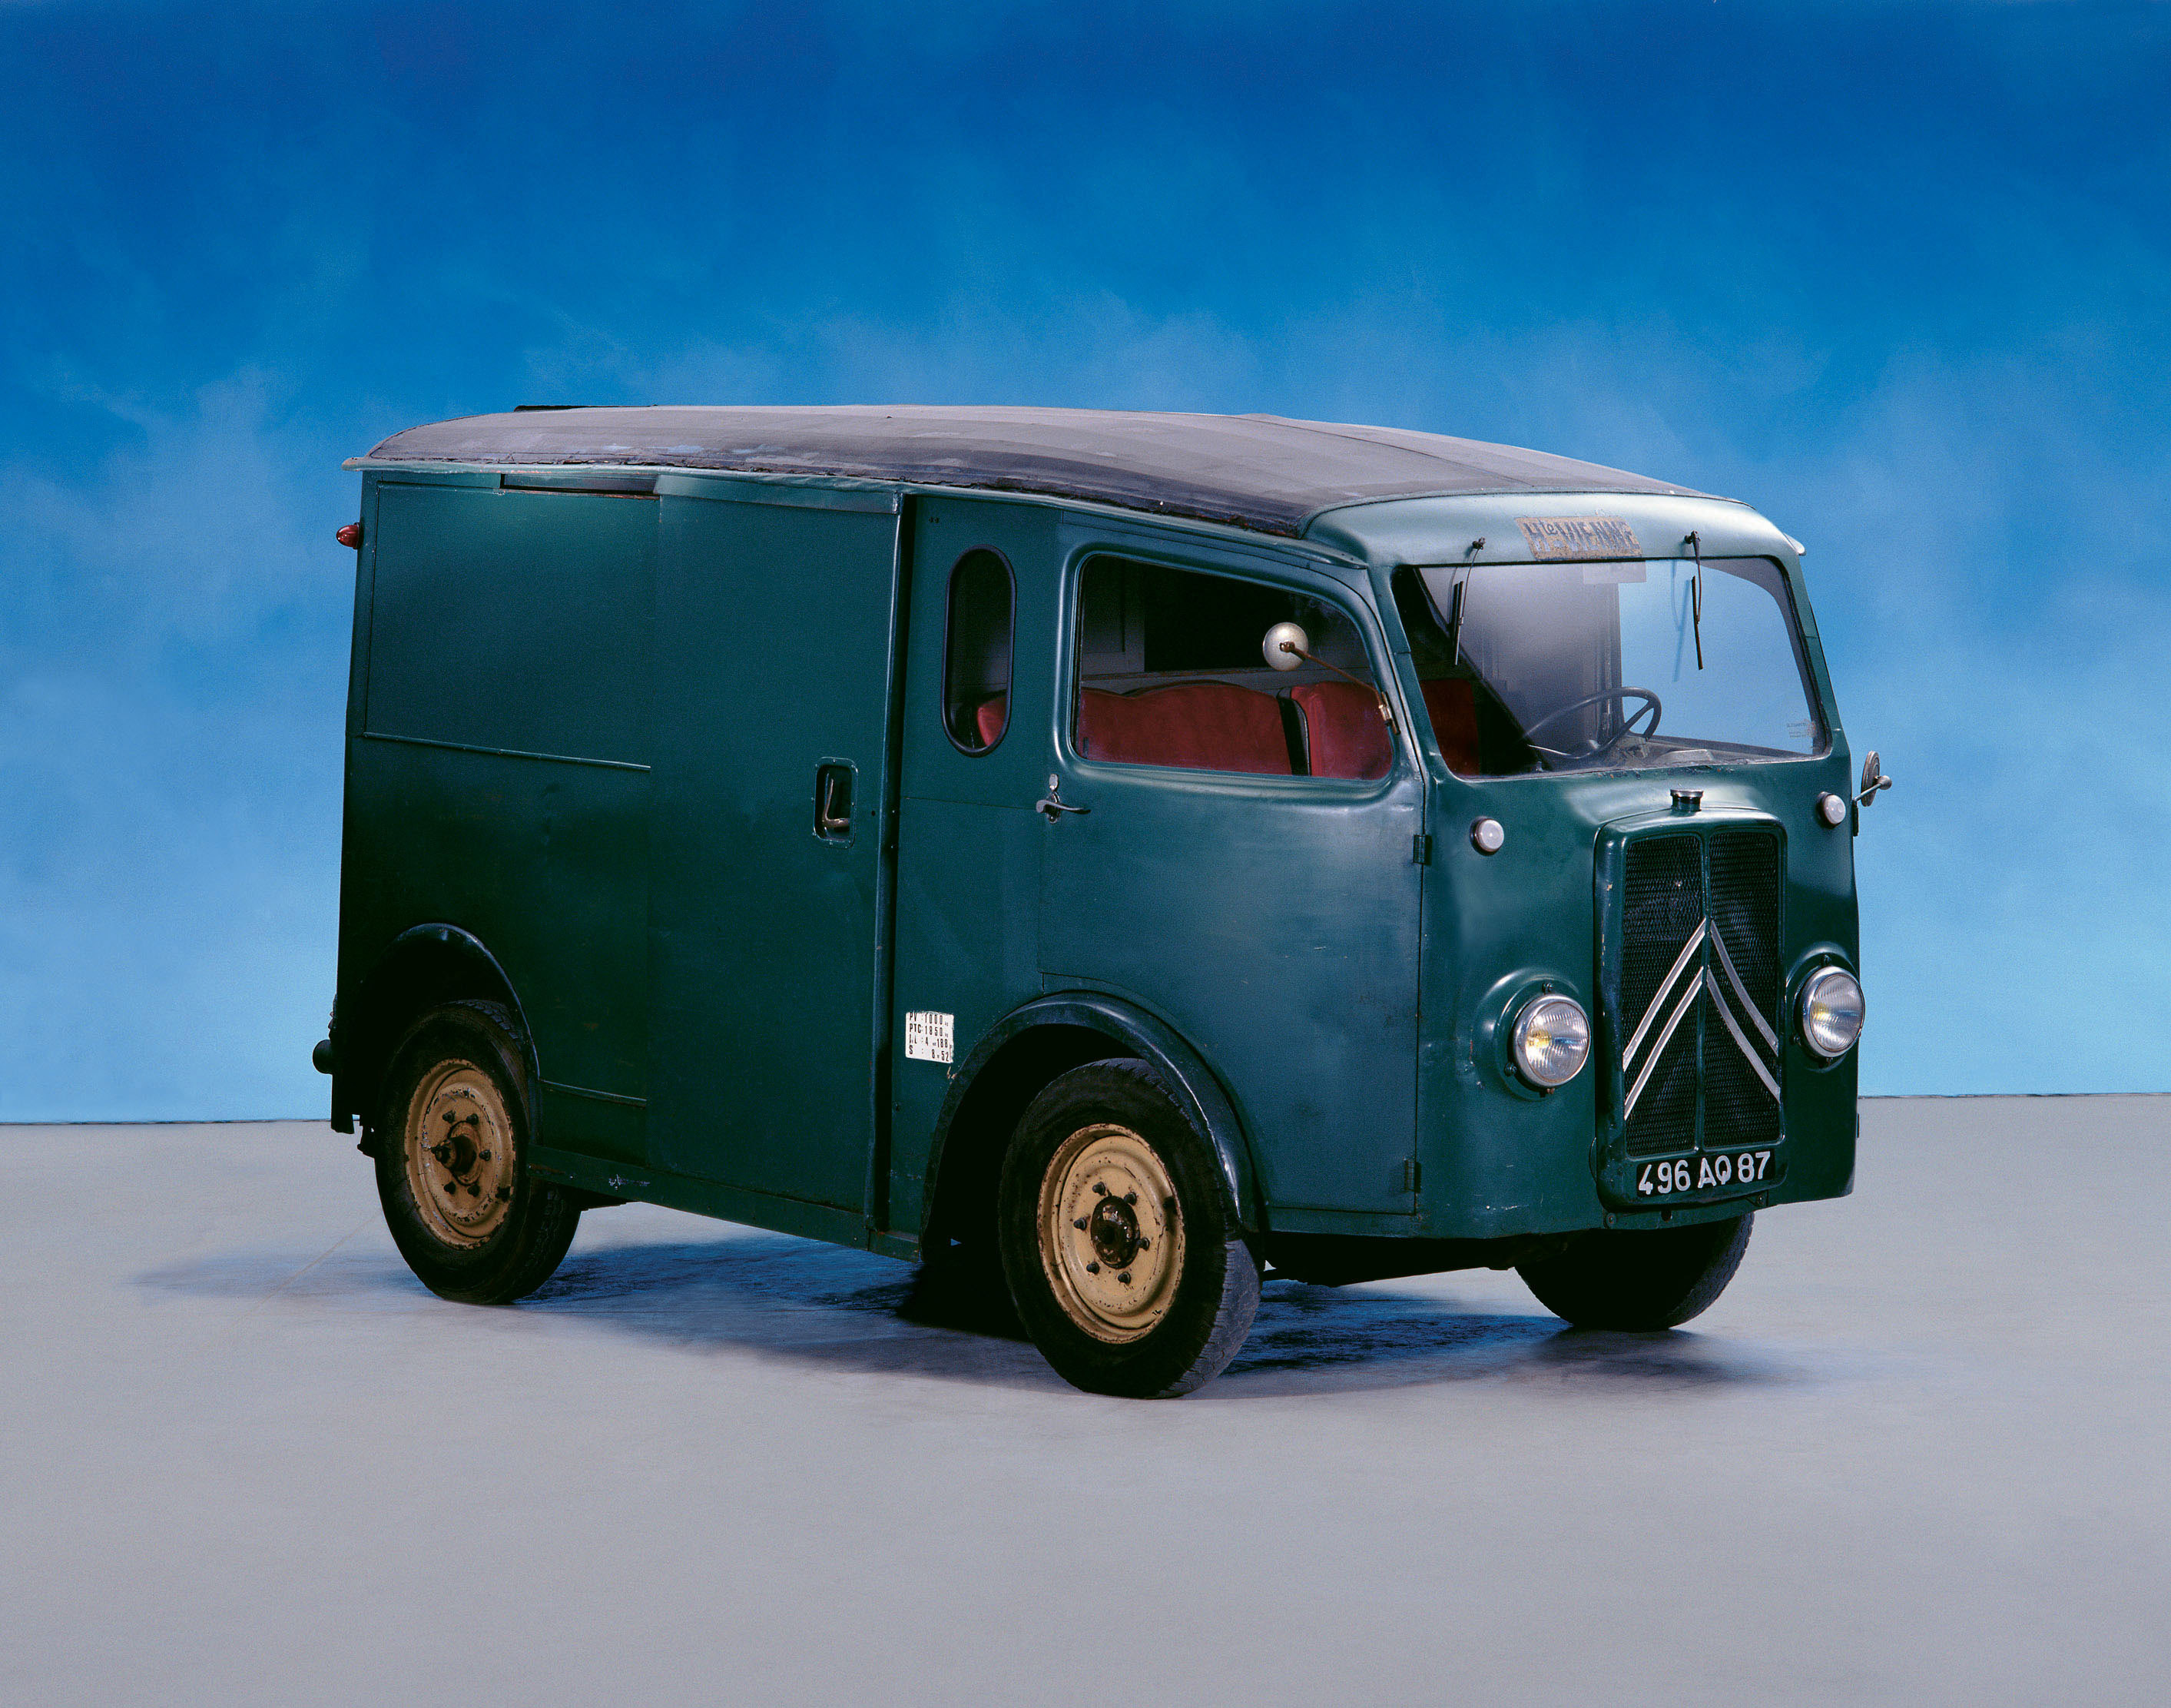 In 1937, Citroën showed the TUB (Transport Utilitaire series B) van which presaged the architecture of the modern van with its forward control cab and front wheel drive lay out.